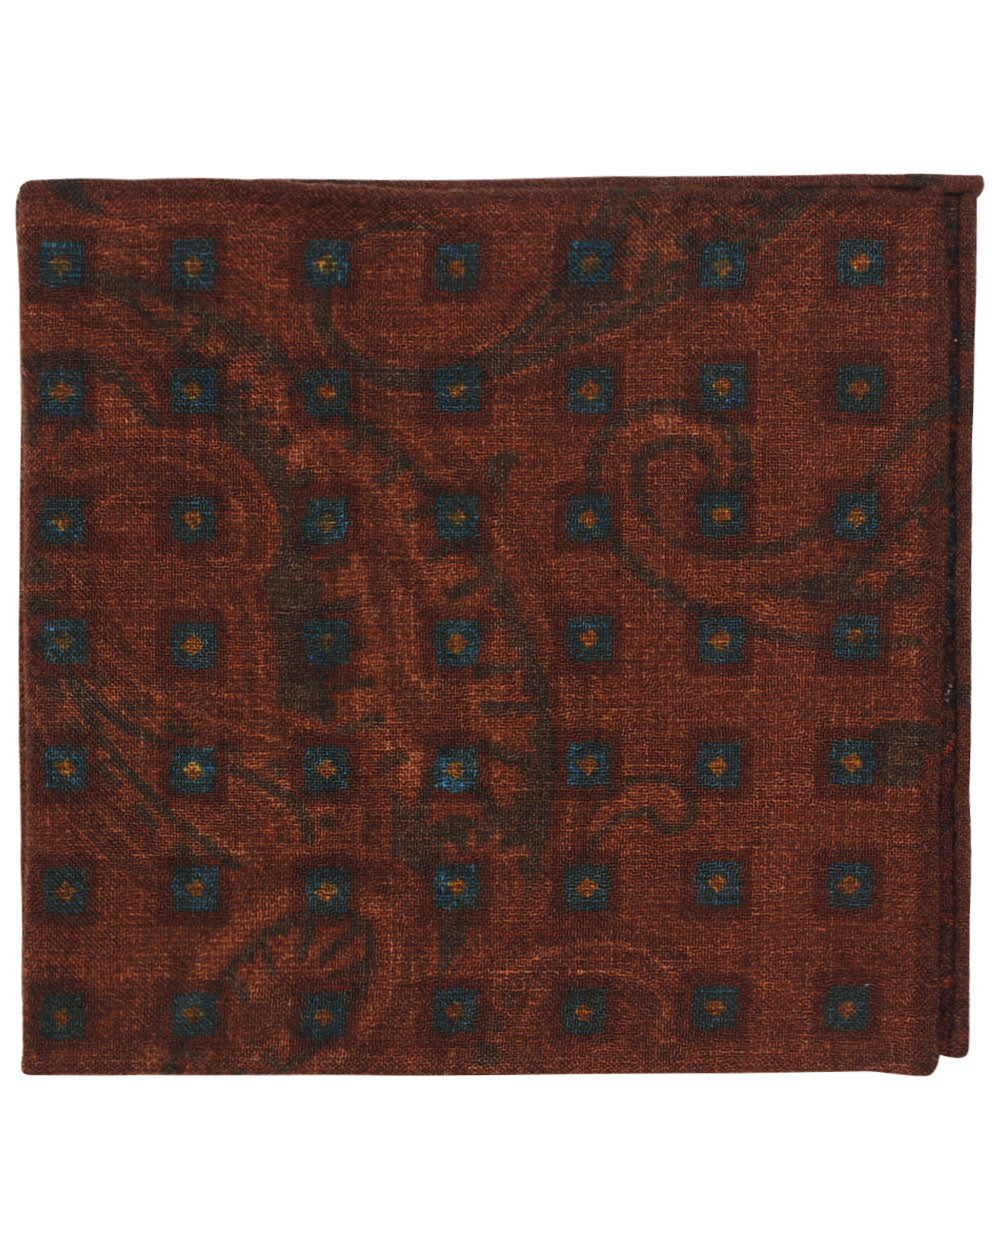 Brown and Blue Geometric Paisley Reversible Wool Pocket Square